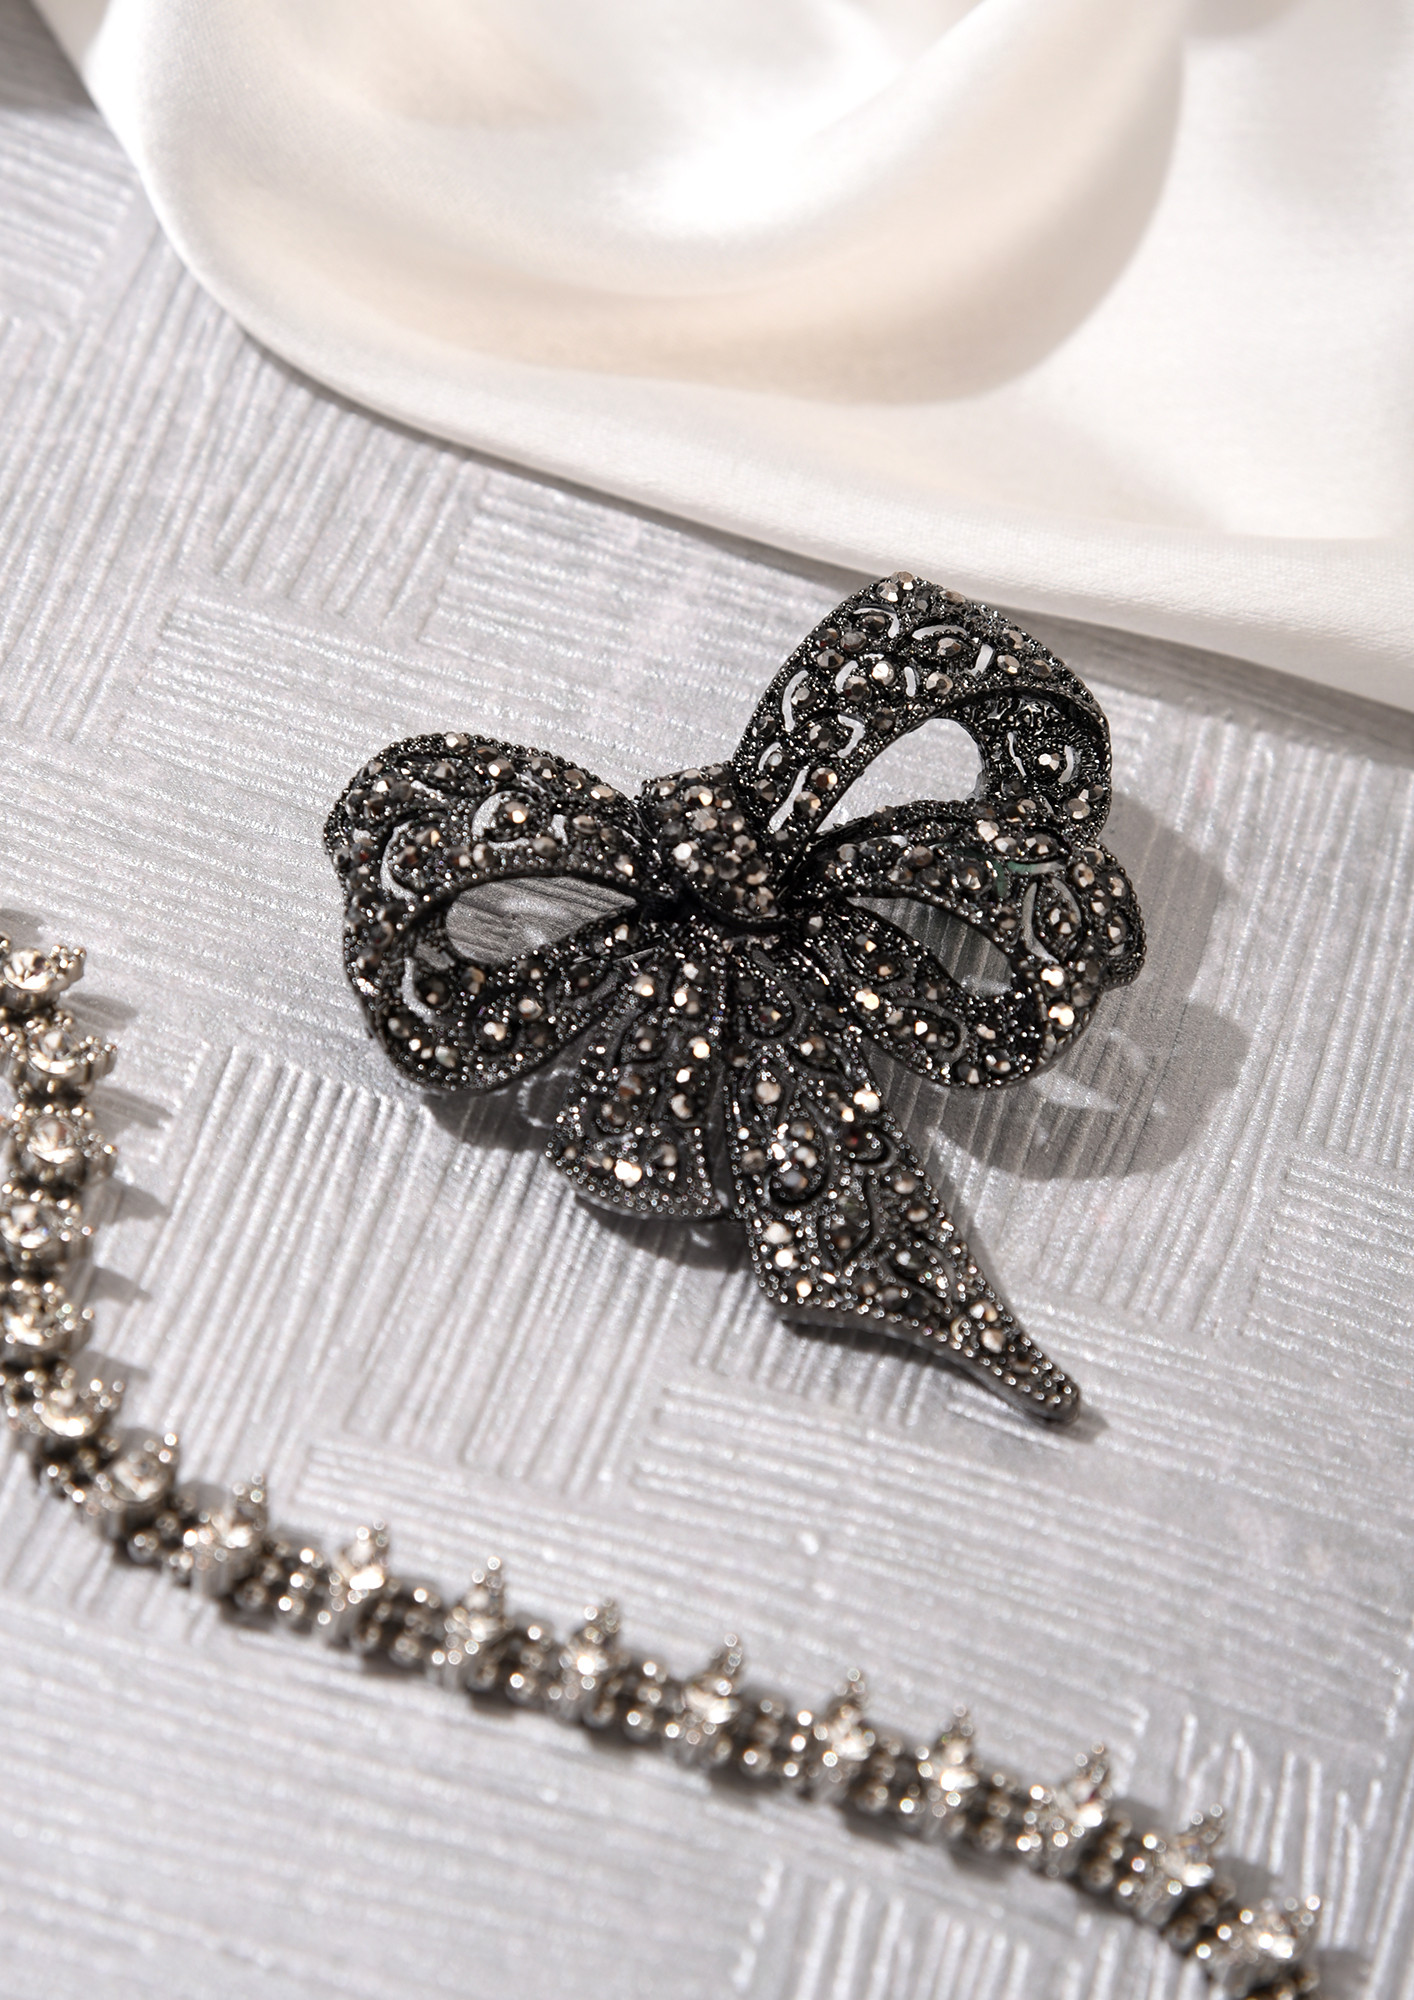 THAT BOW THOUGH BLACK BROOCH